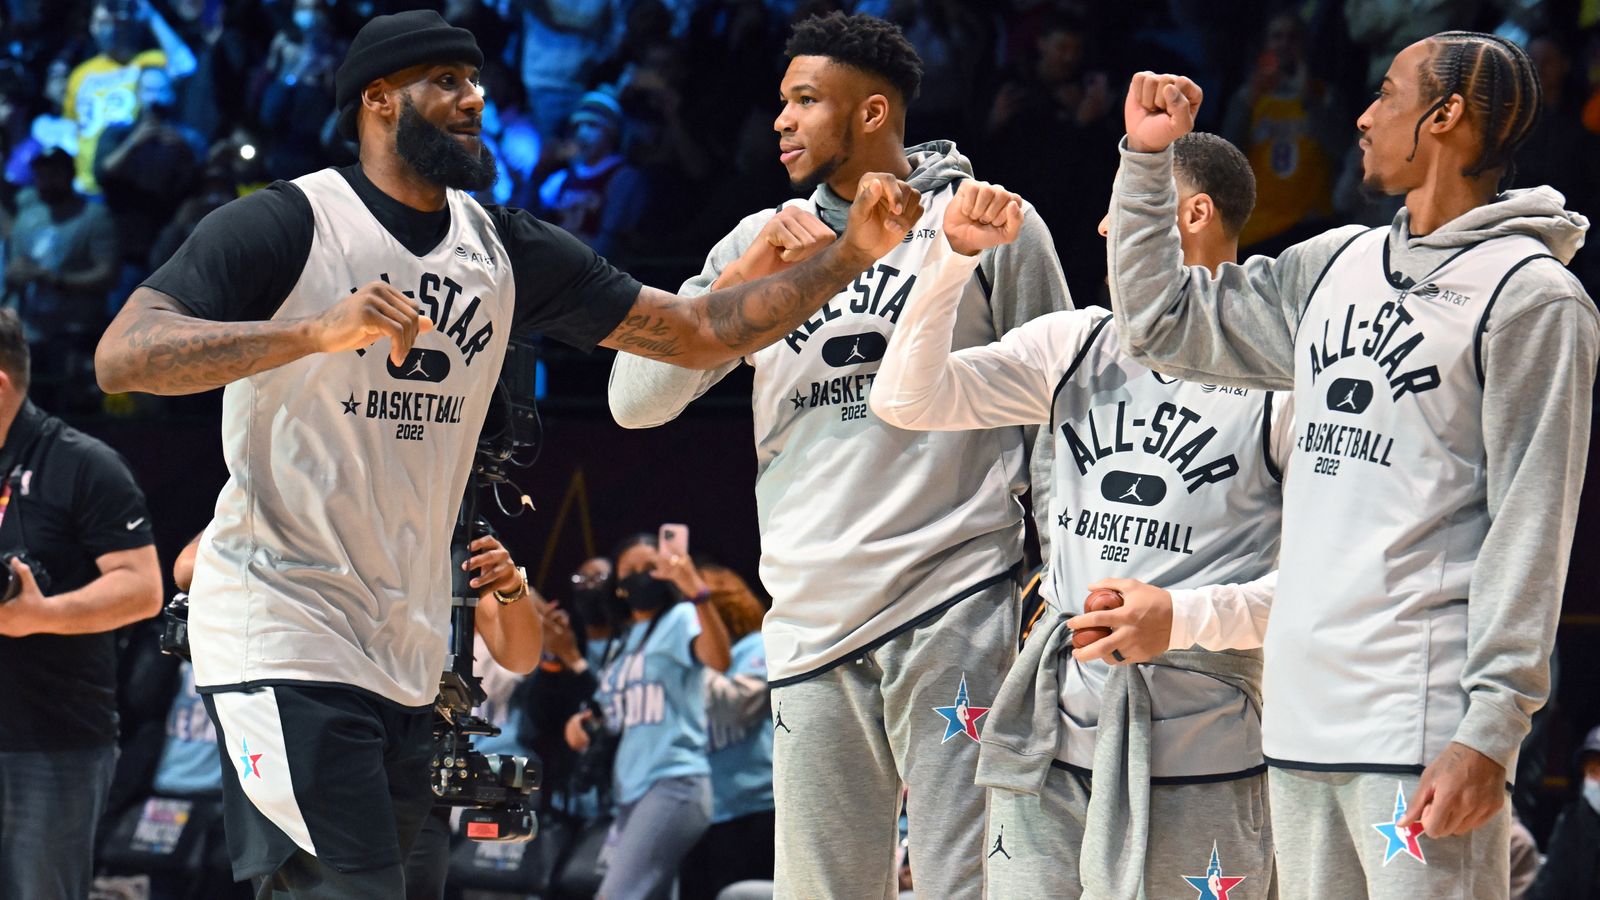 Team LeBron Takes Thrilling All-Star Game Thanks To Clutch Free